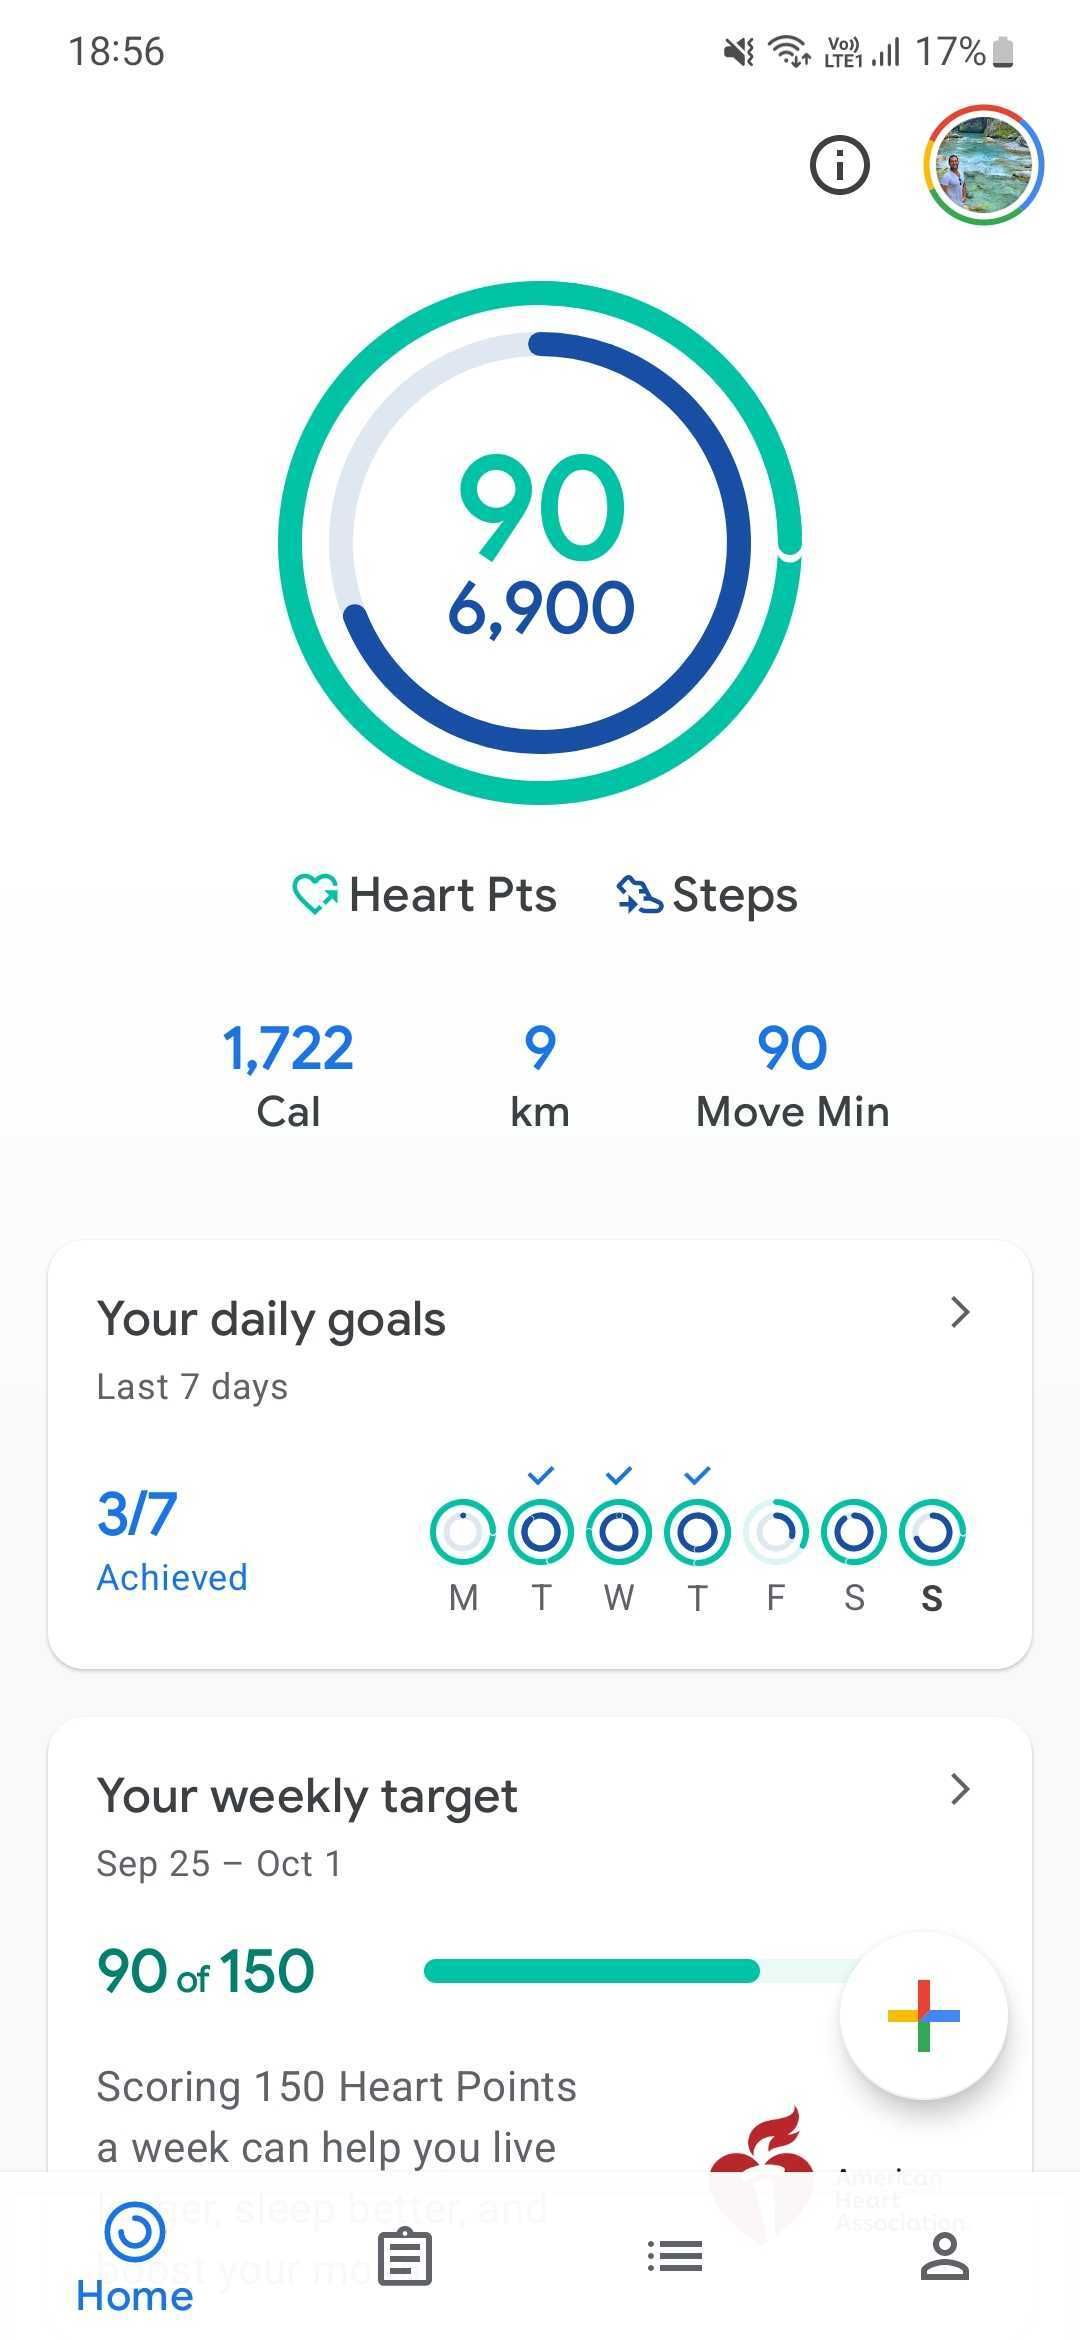 Screenshot of the Google fit app showing the main dashboard, with heart points and steps